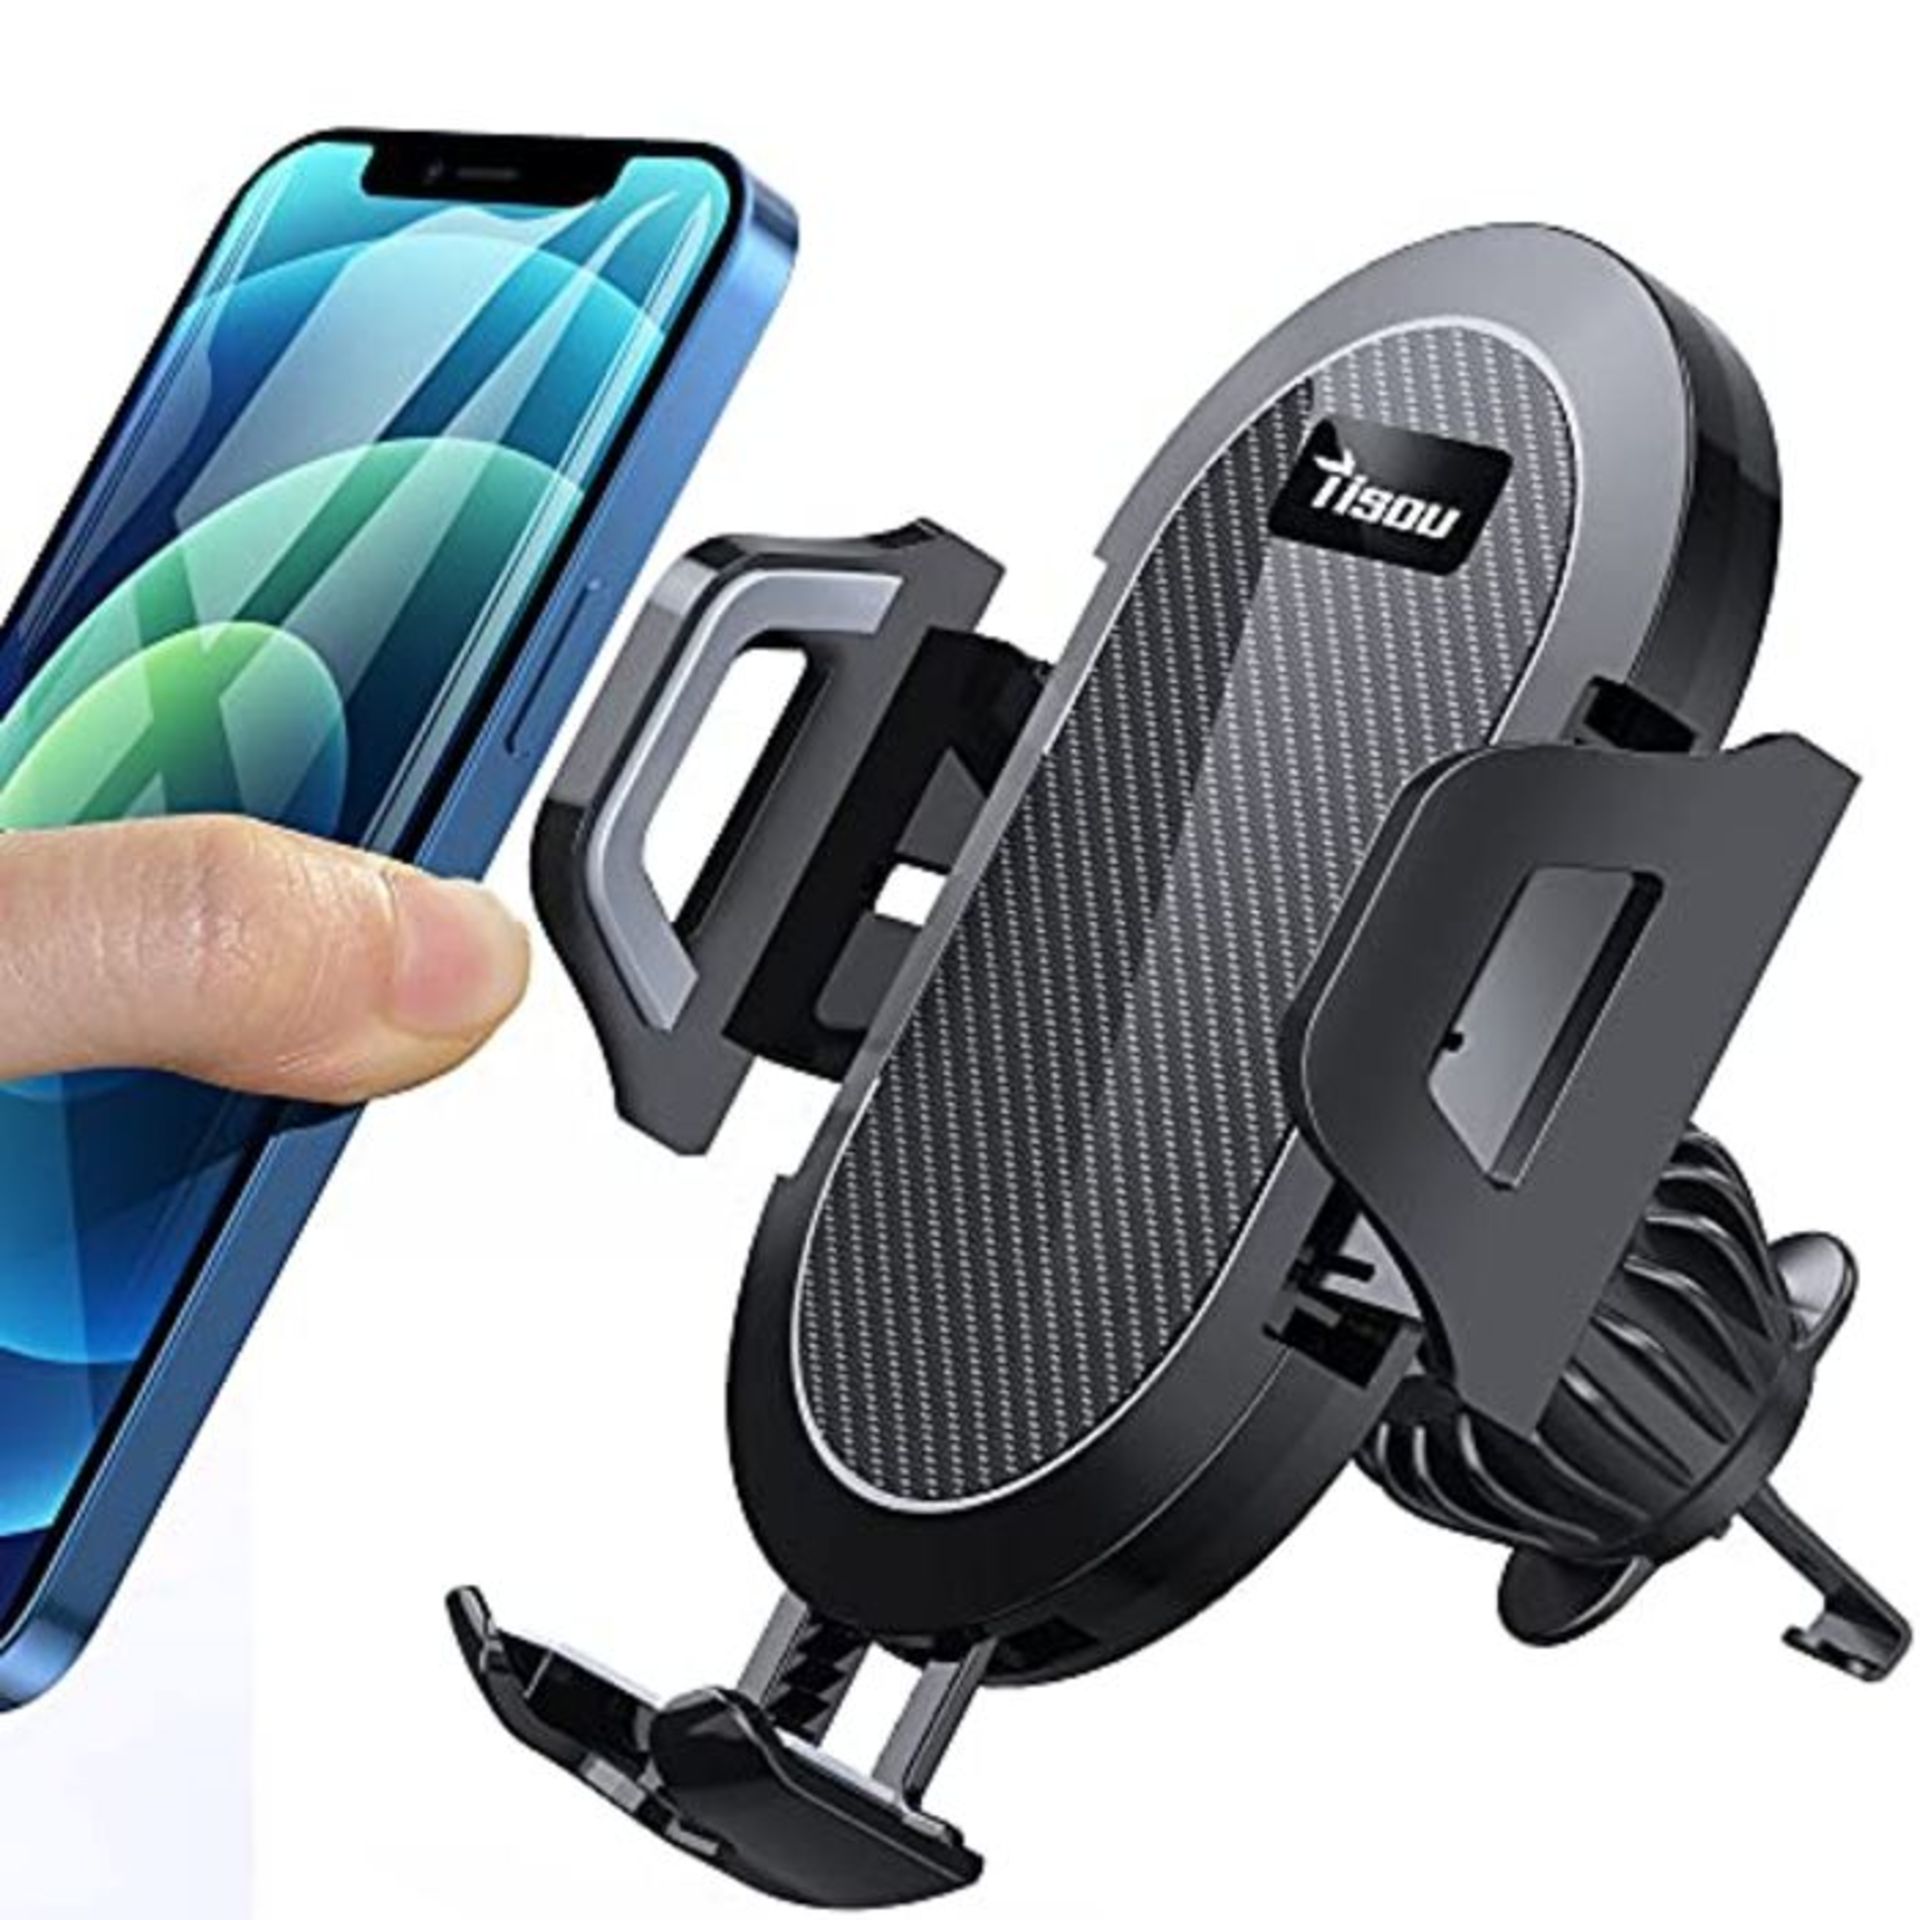 Tisoutec Car Phone Holder 2021 Upgraded 360° Rotation Mobile Phone Holders for Cars w